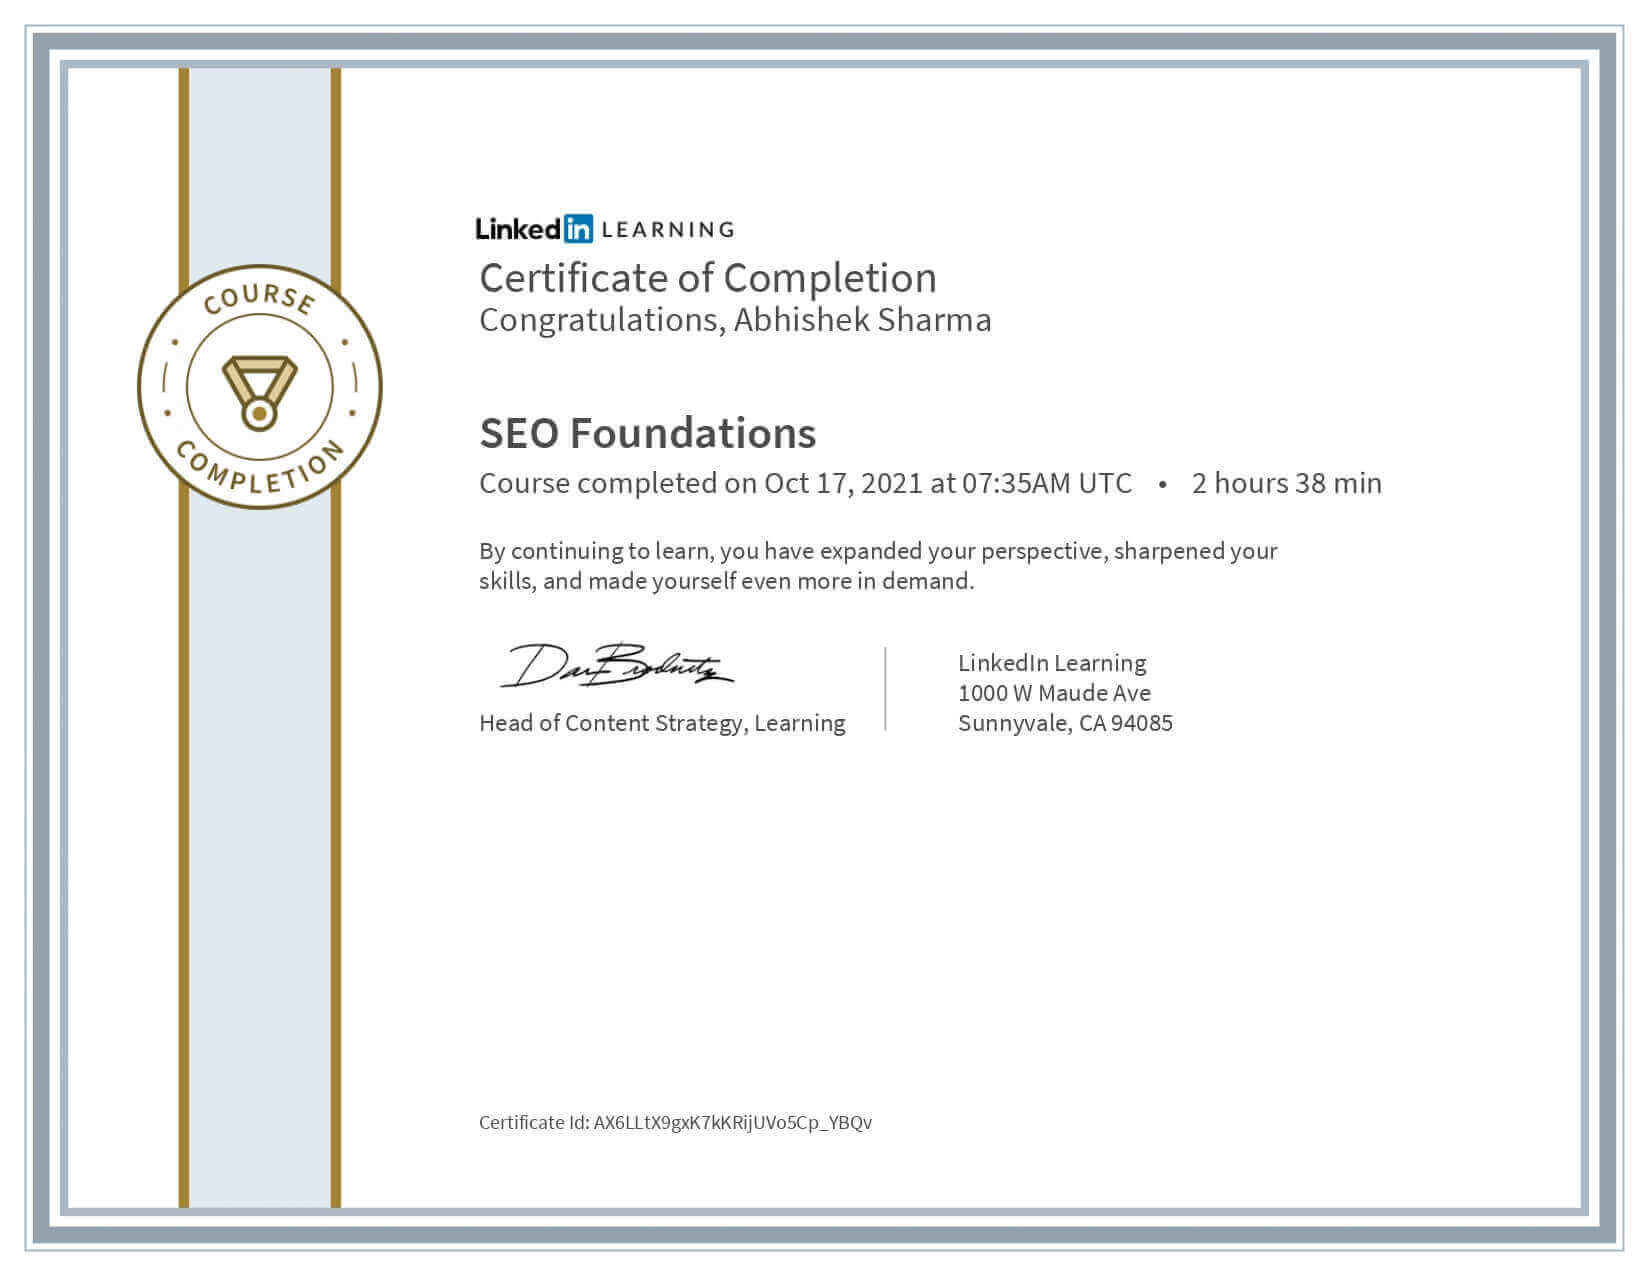 linkedin learning free courses with certificate of completion